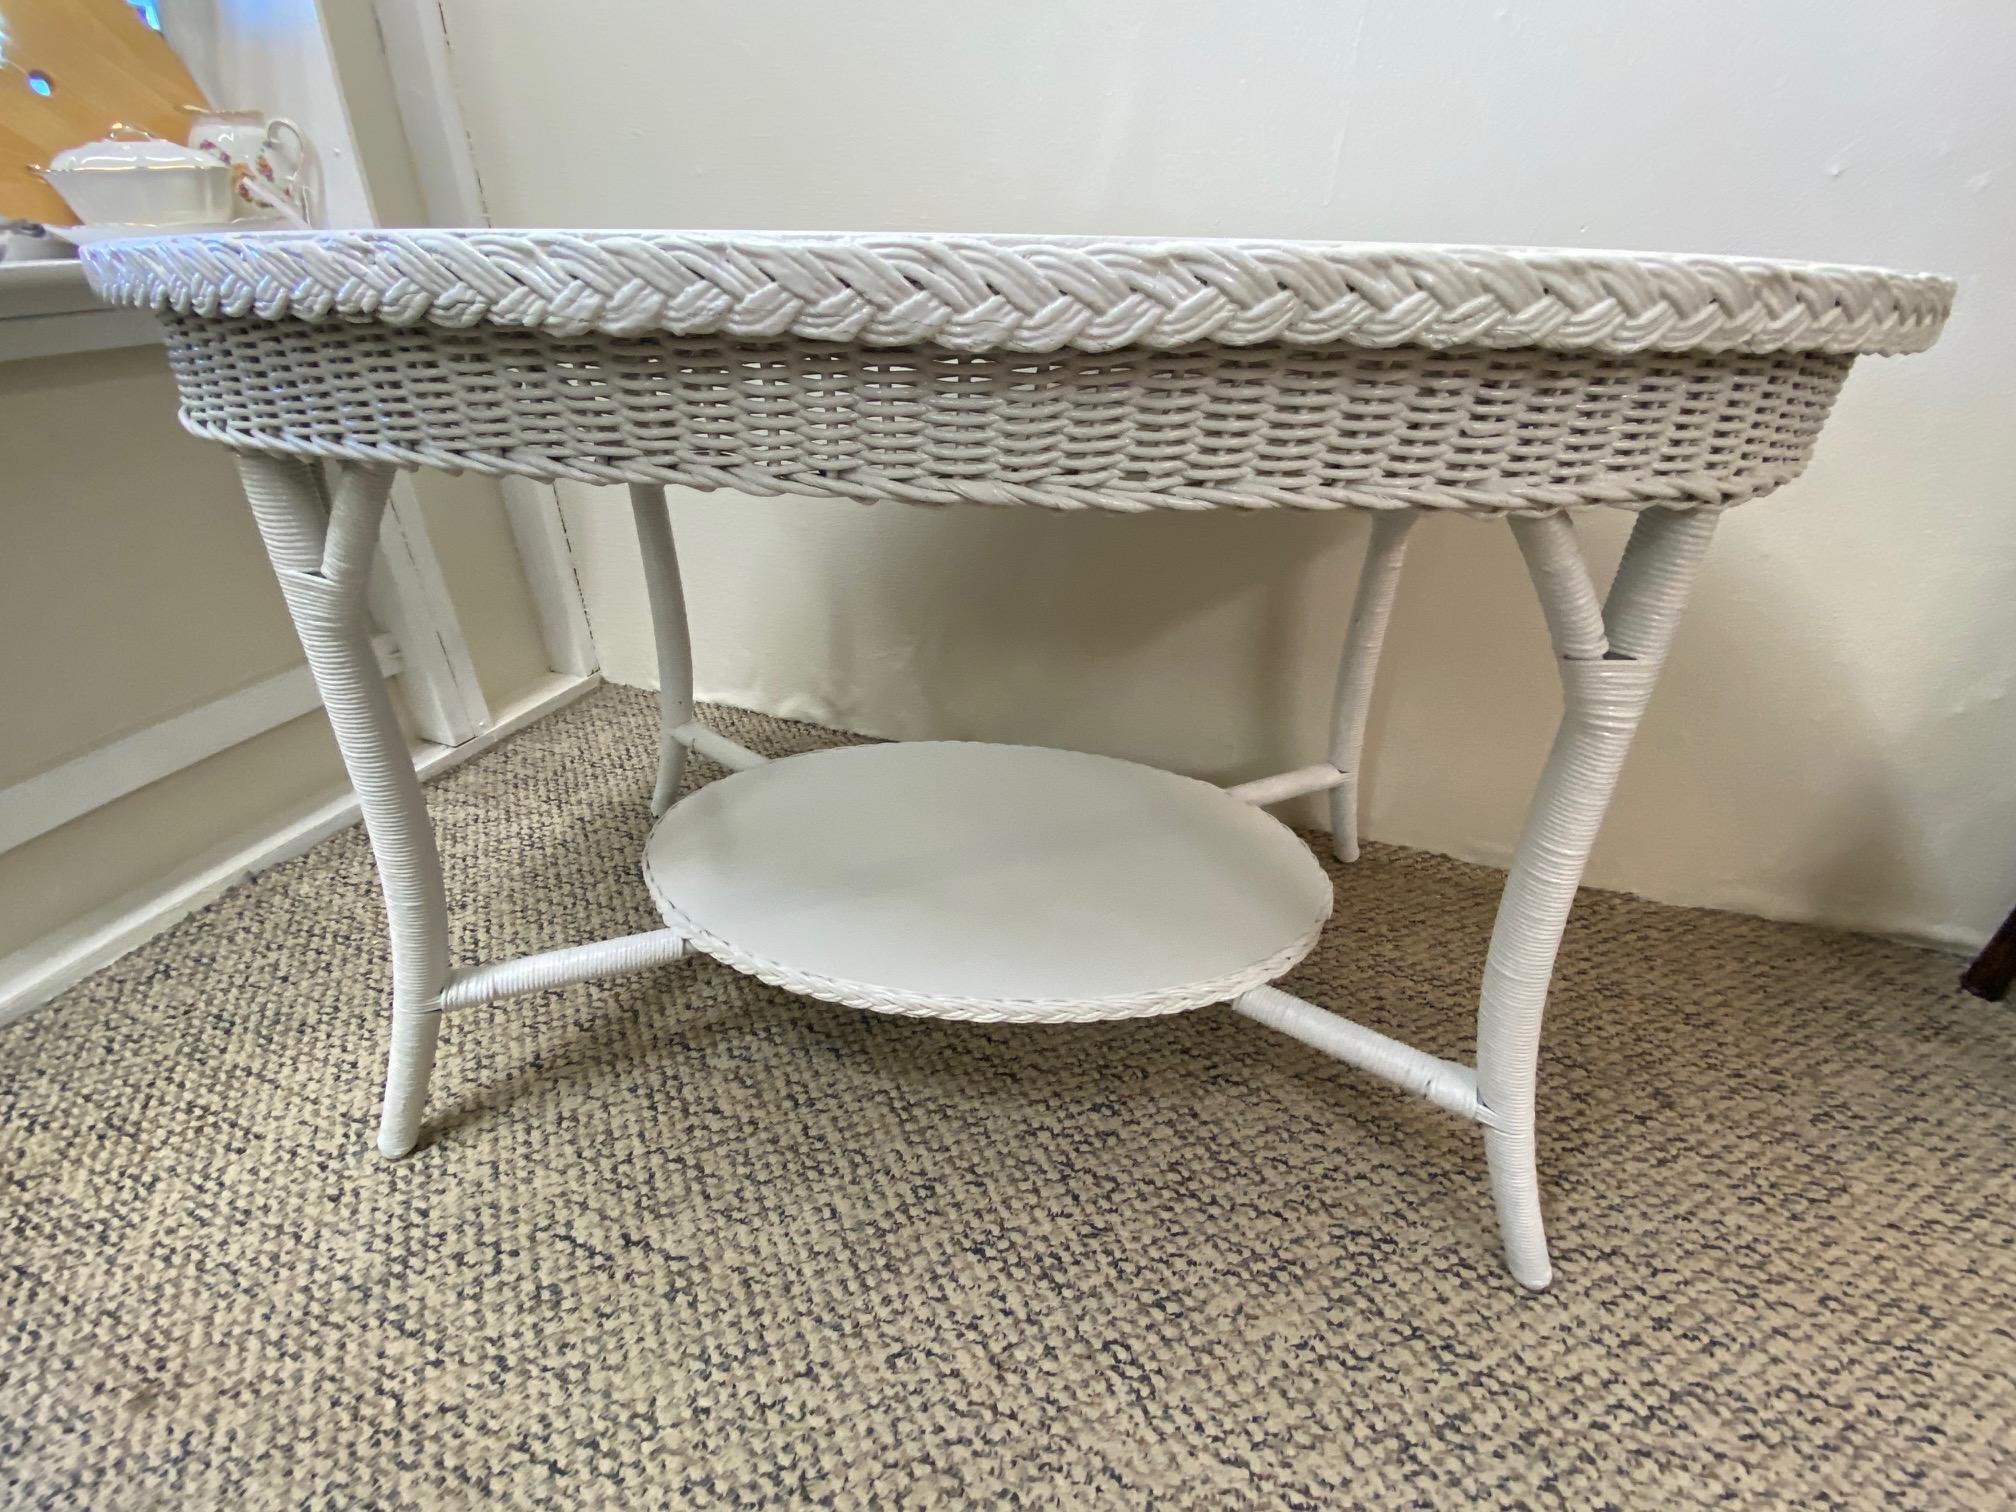 Vintage American Wicker Company Freshly White Painted Oval Dining Table For Sale 2